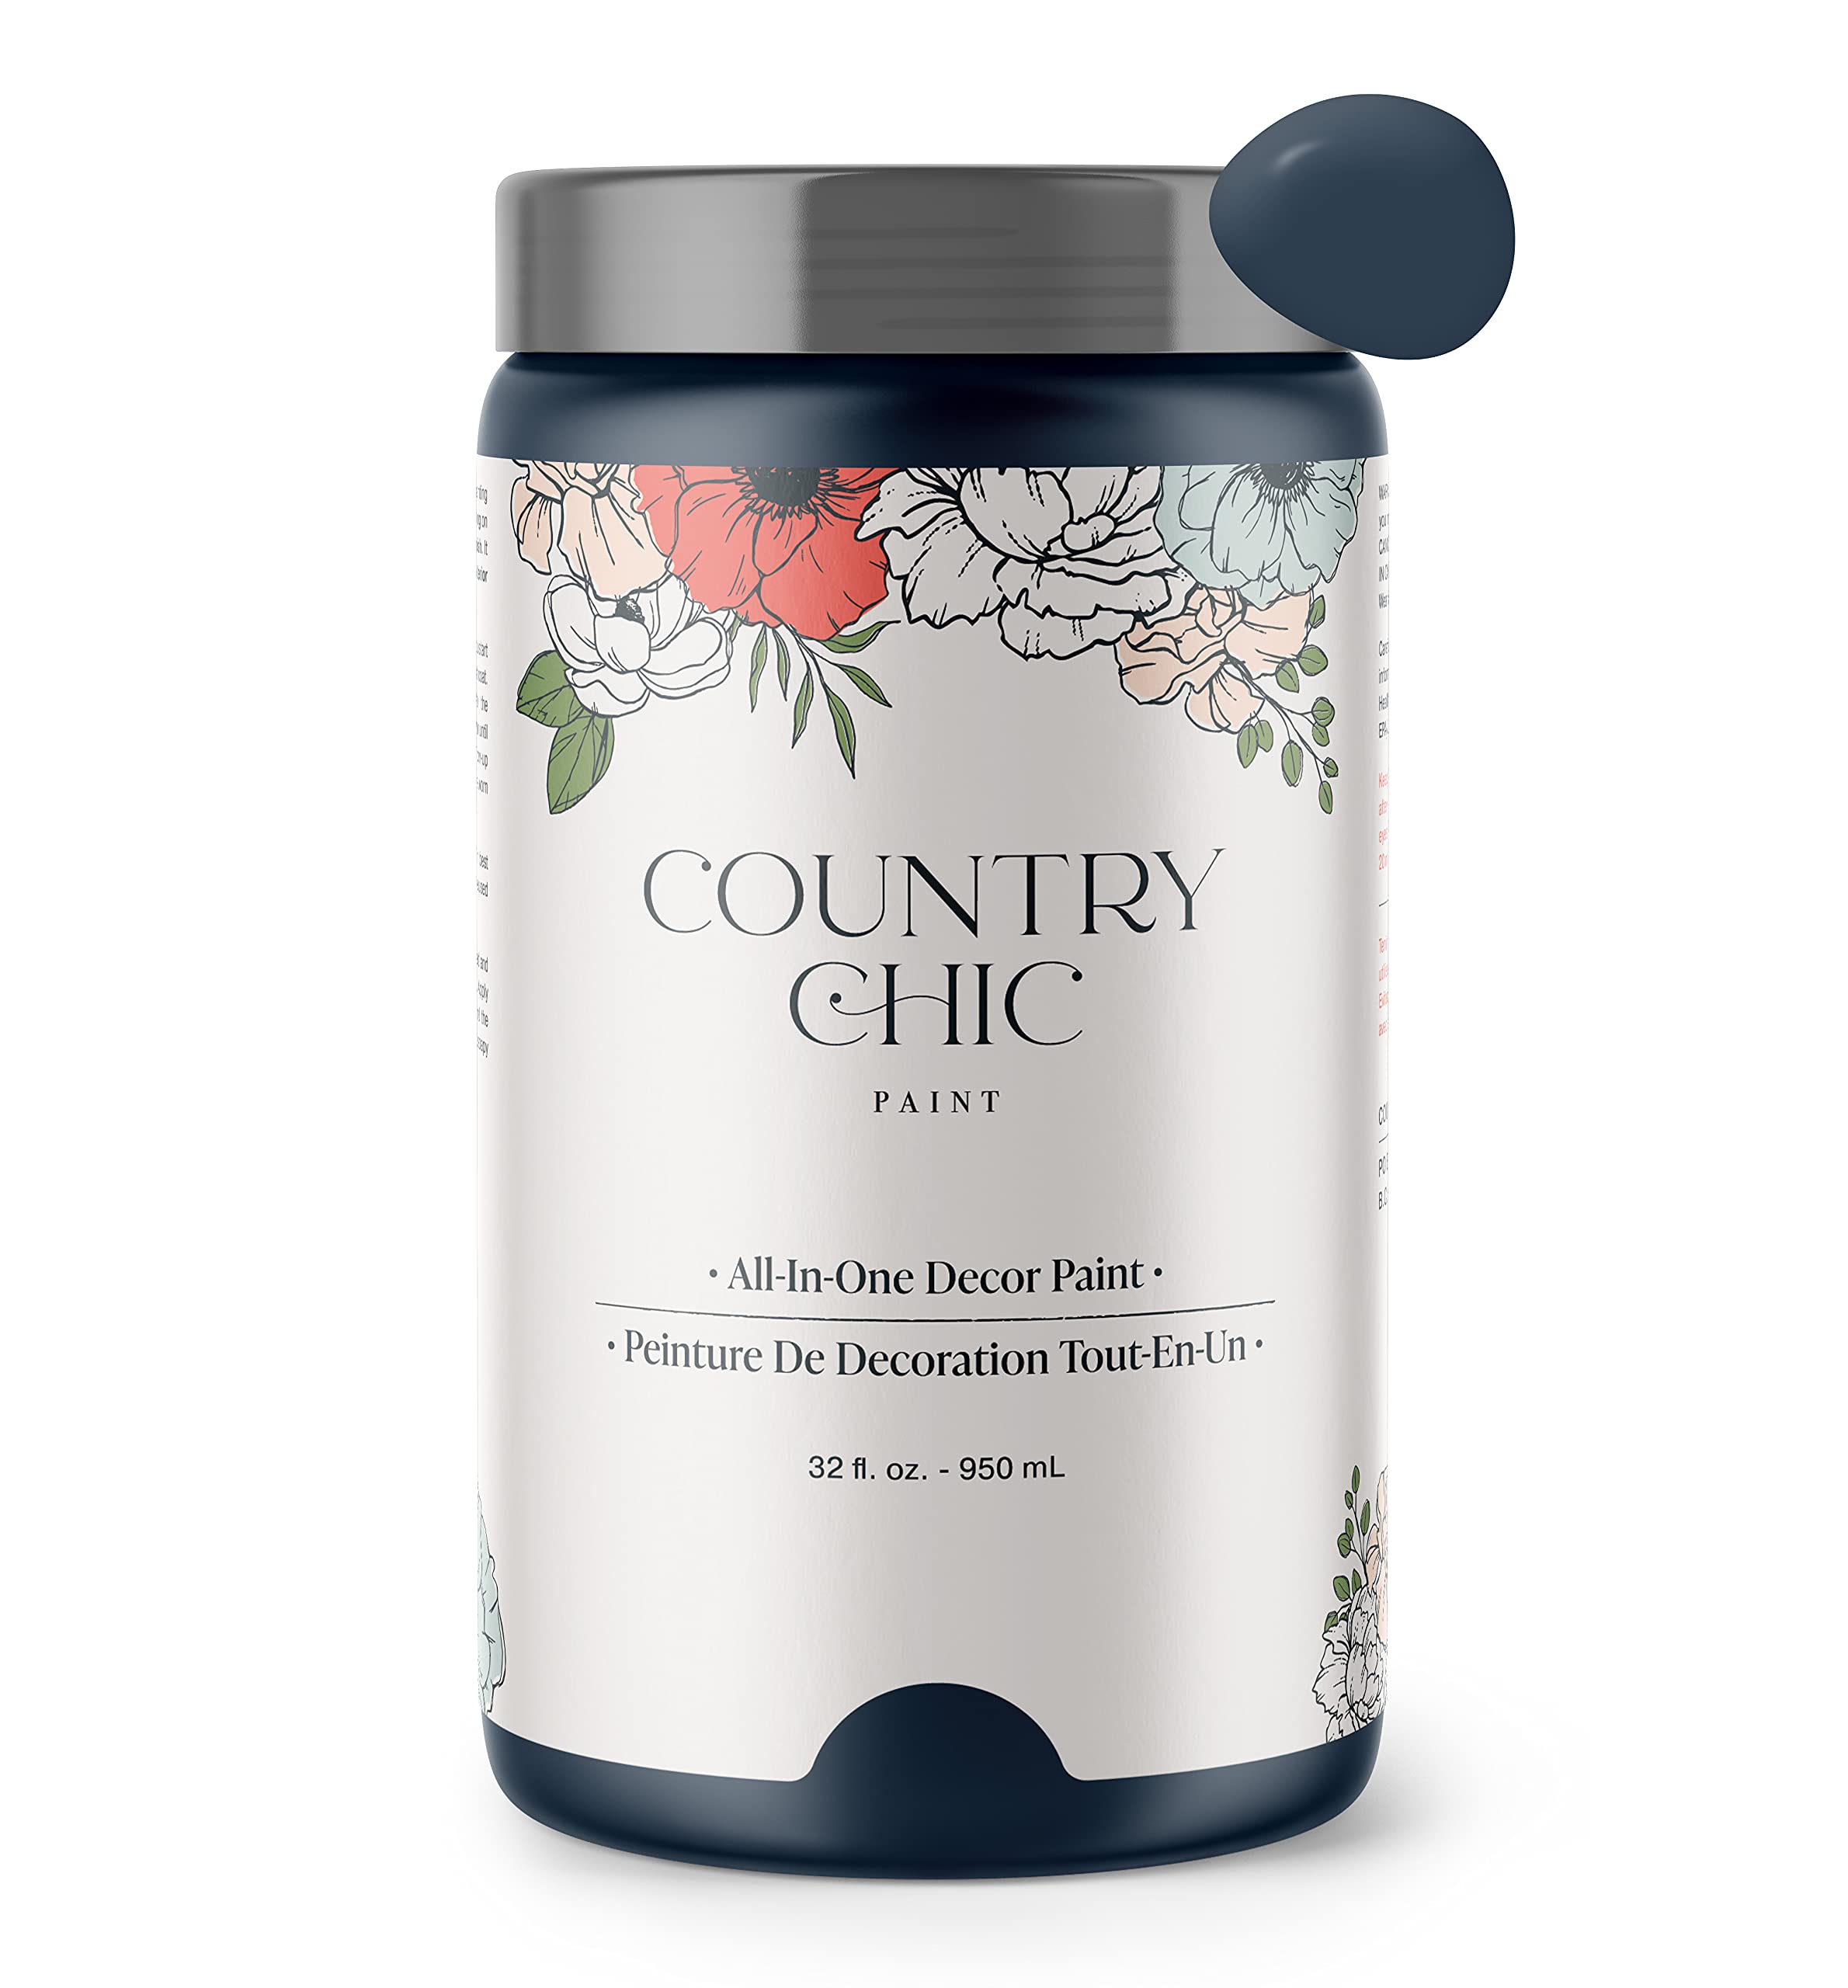 Country Chic Paint Chalk Style Paint - for Furniture, Home Decor, Crafts - Eco-Friendly - All-in-One - No Wax Needed (Peacoat [Navy Blue], Quart (3